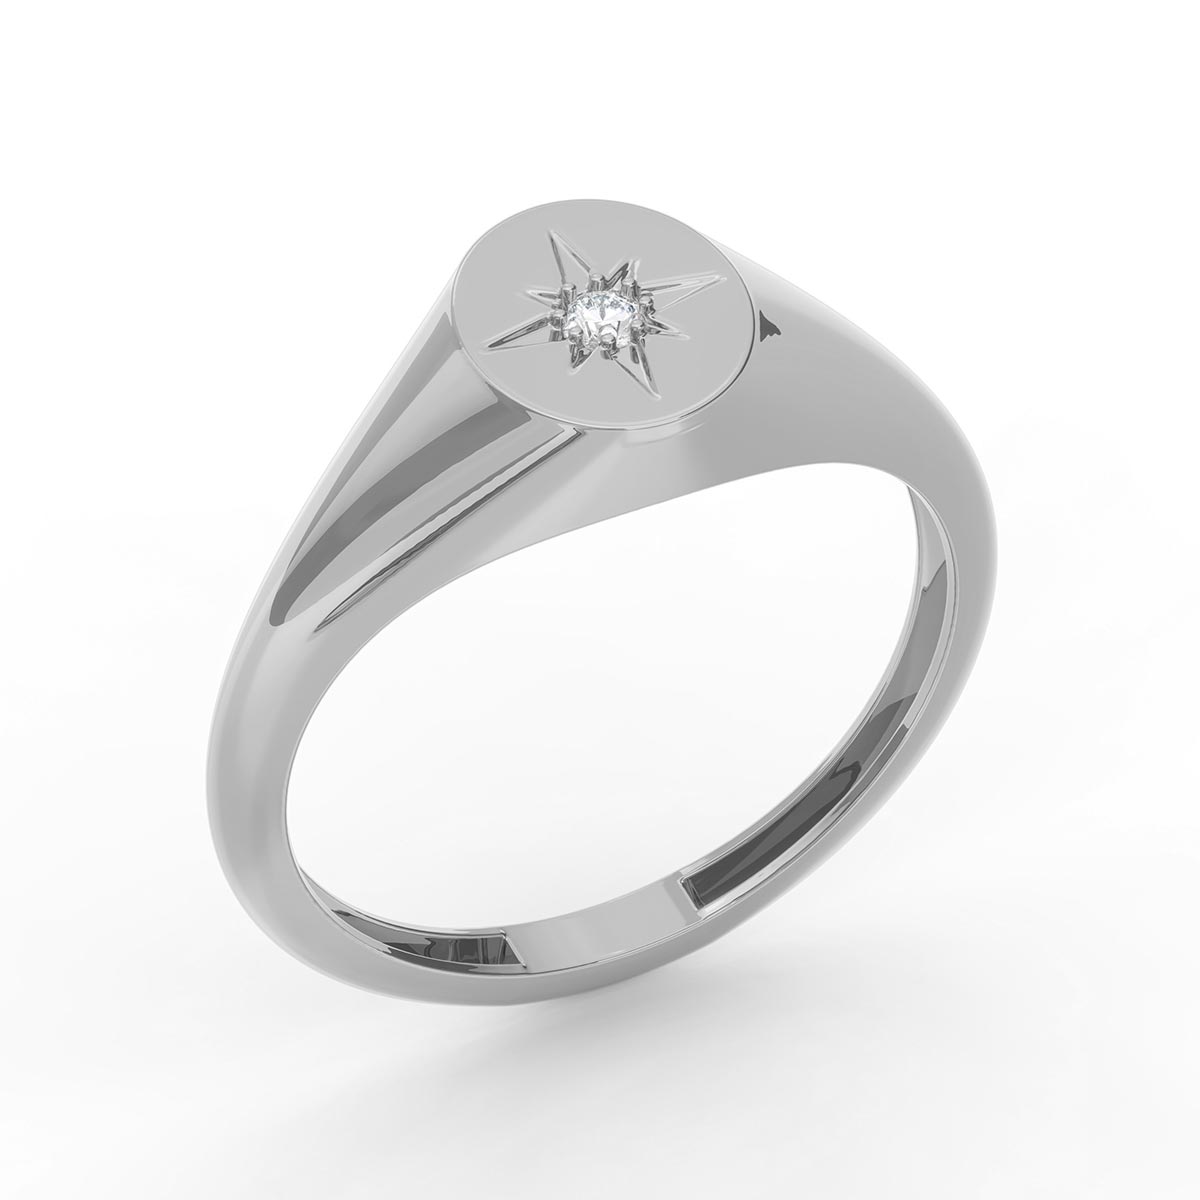 Compass Star Signet Ring with Stone